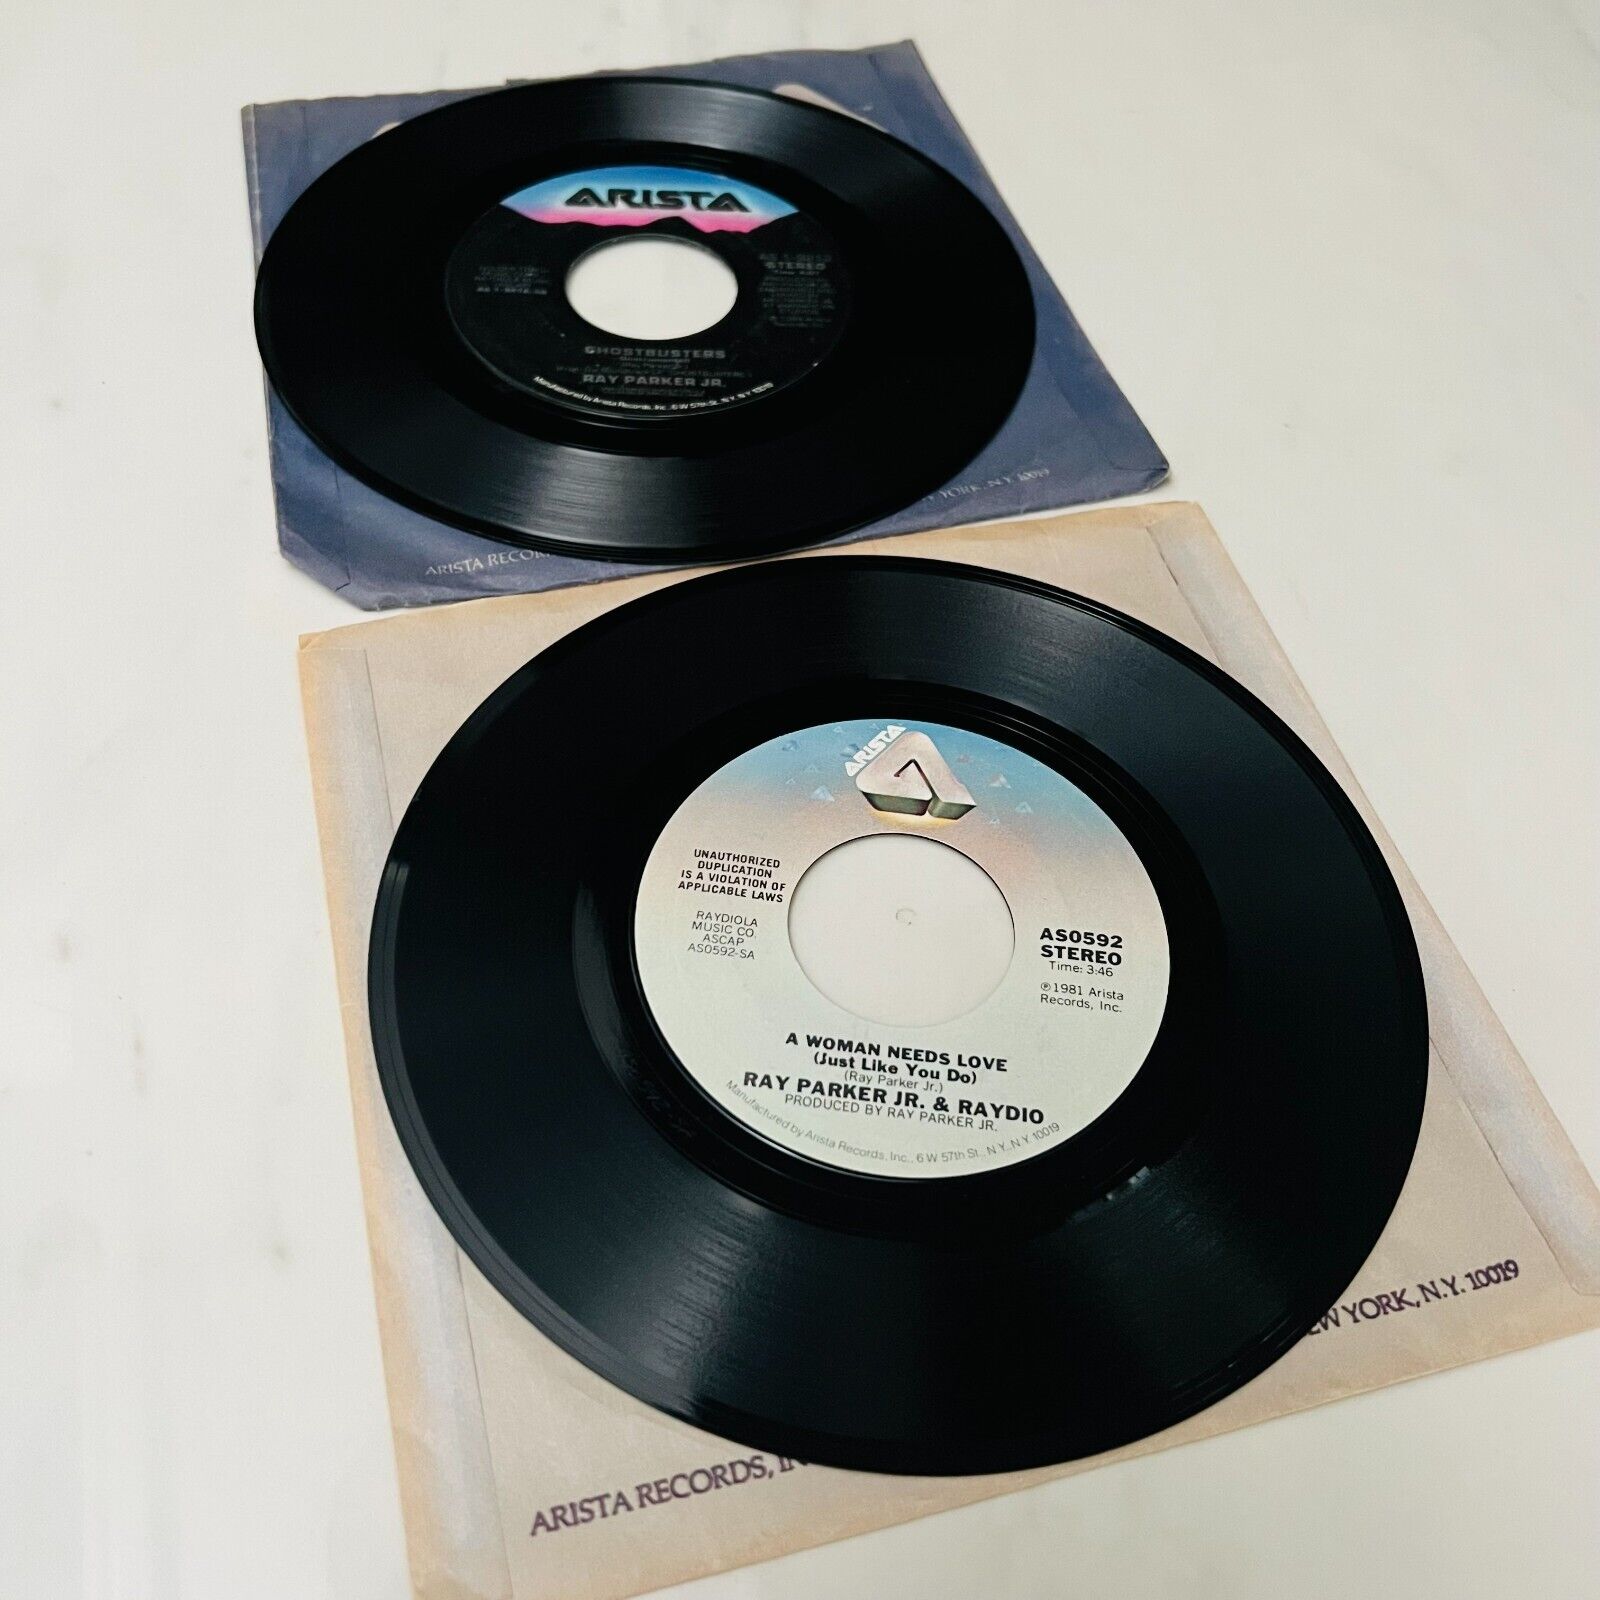 Ray Parker Jr. - Lot of 2 - Single 7" 45rpm Records - Ghostbusters - So Into You